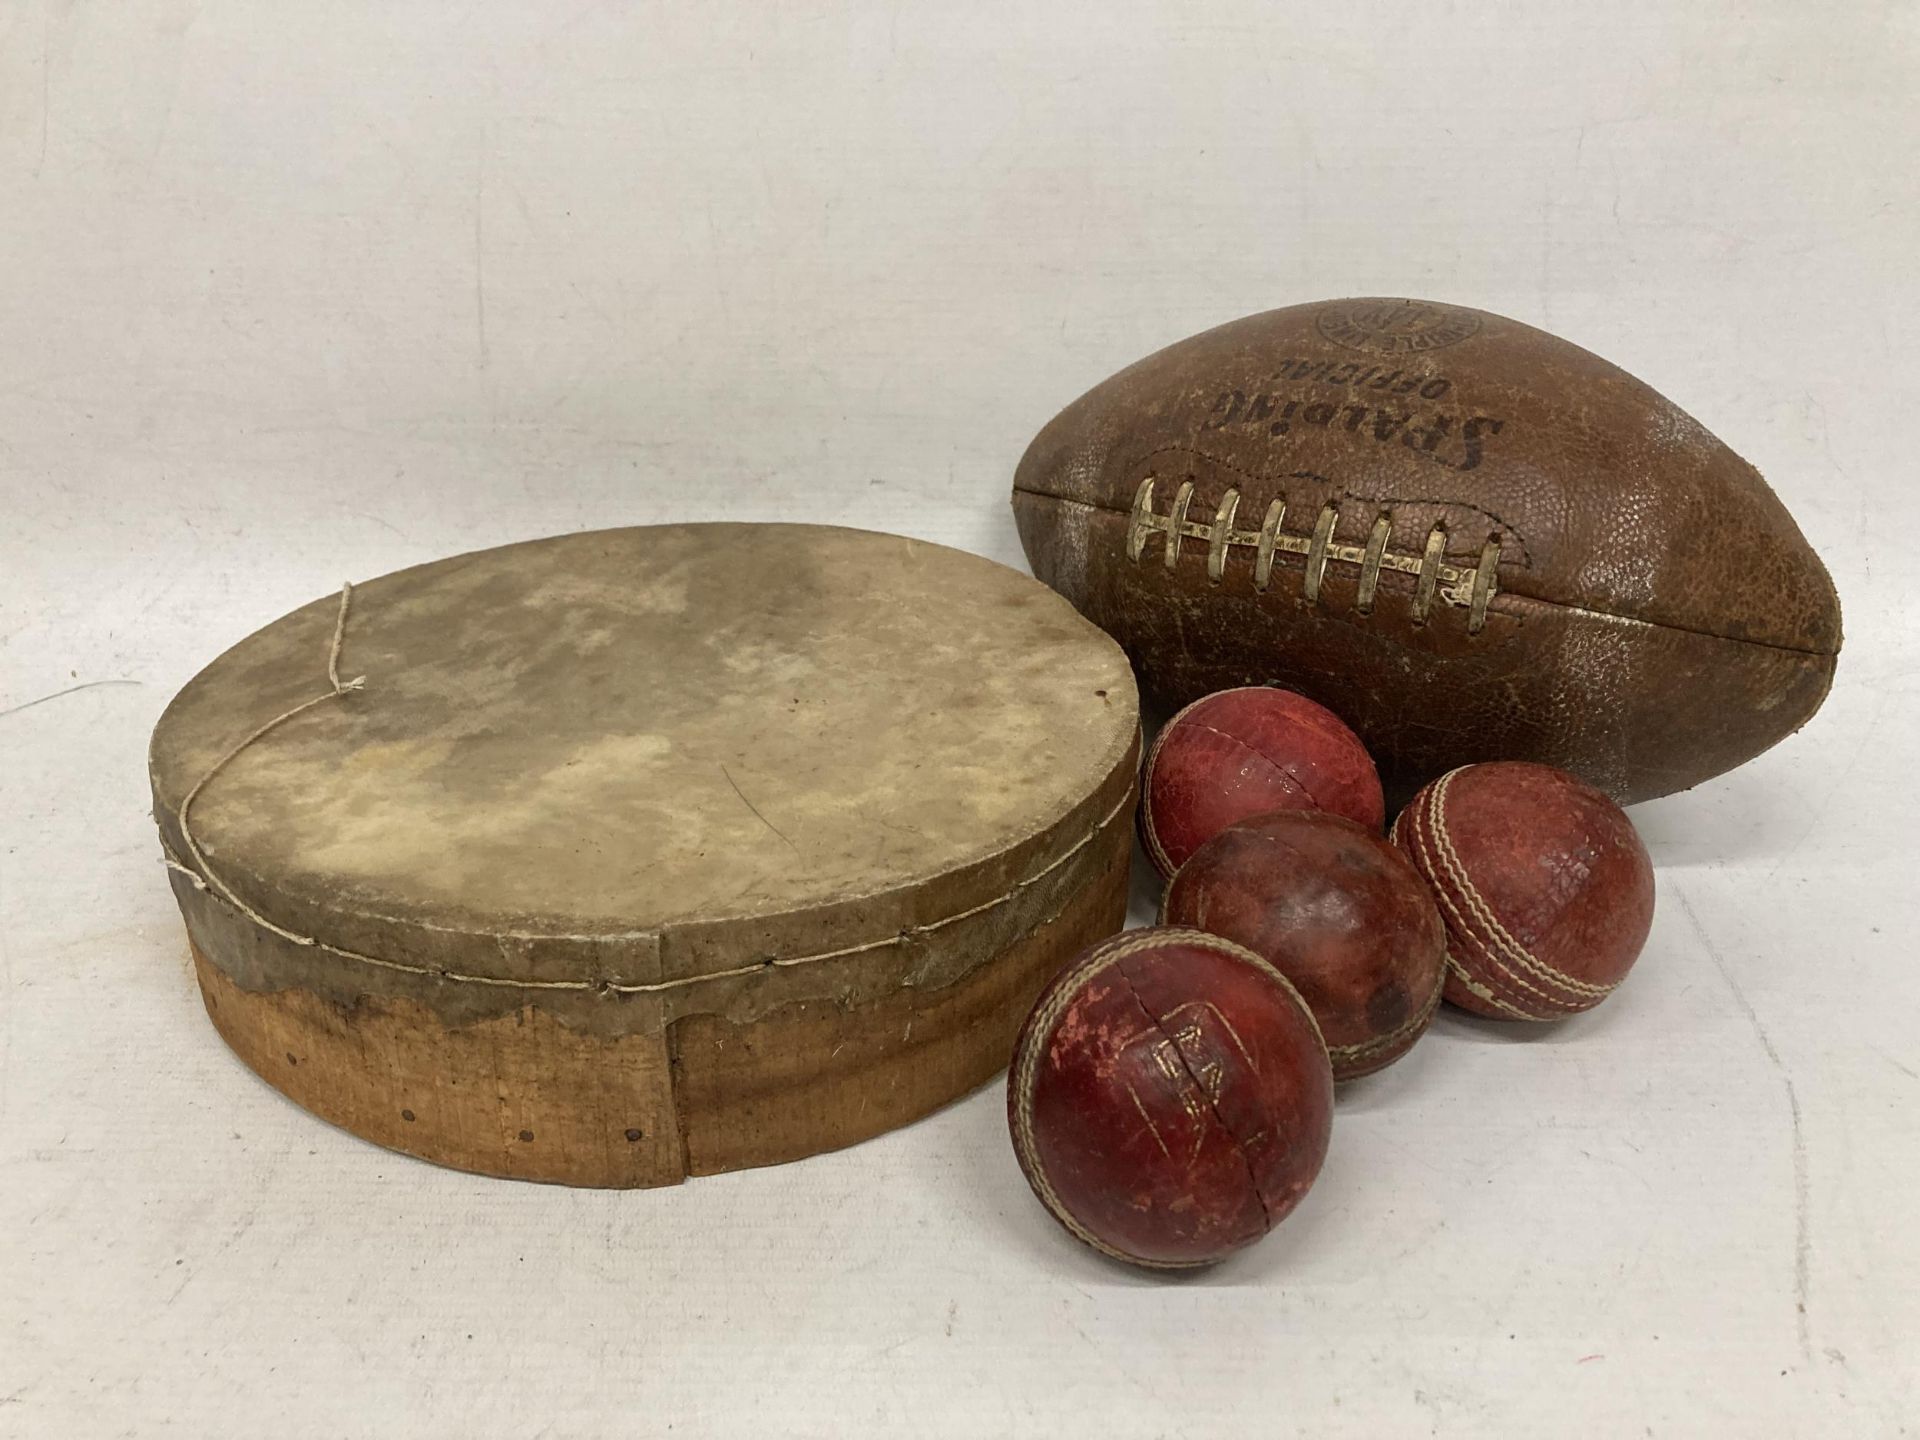 A COLLECTION OF VINTAGE SPORTING ITEMS, SPALDING RUGBY BALL, CRICKET BALLS AND A TAMBORINE